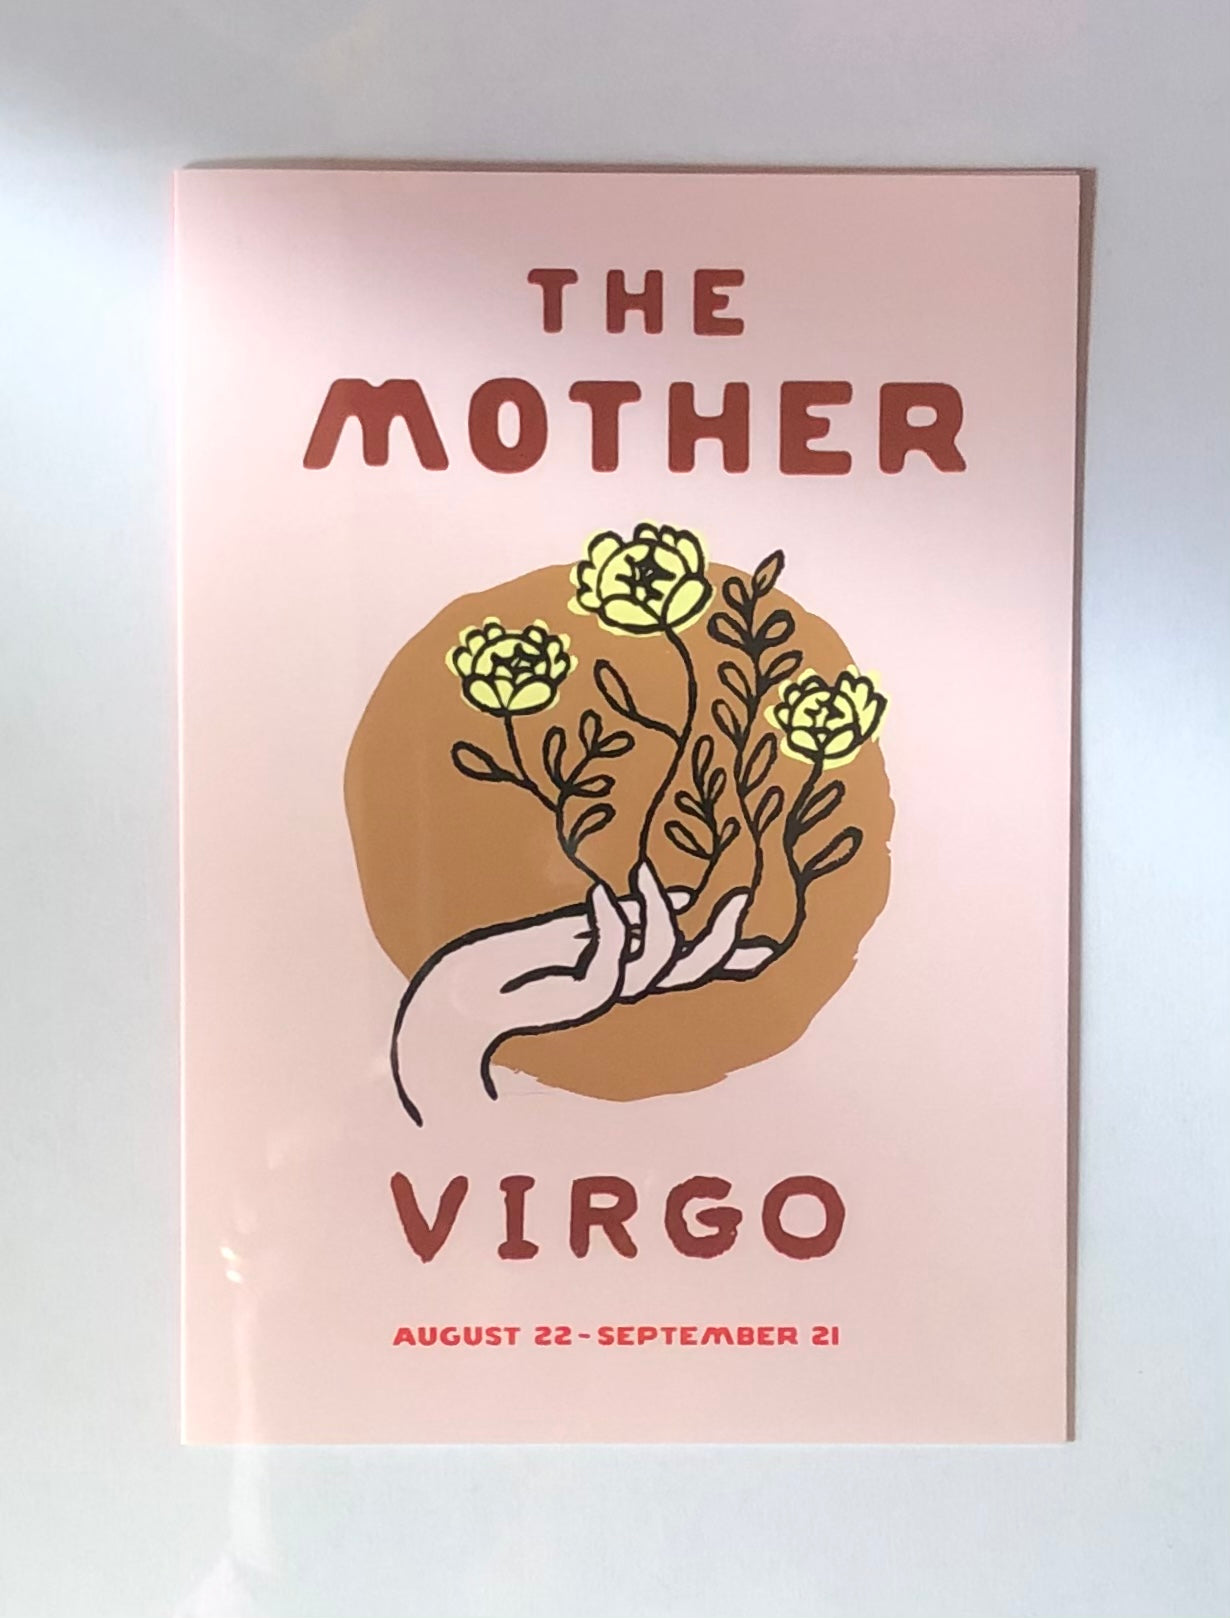 The Mother Virgo card